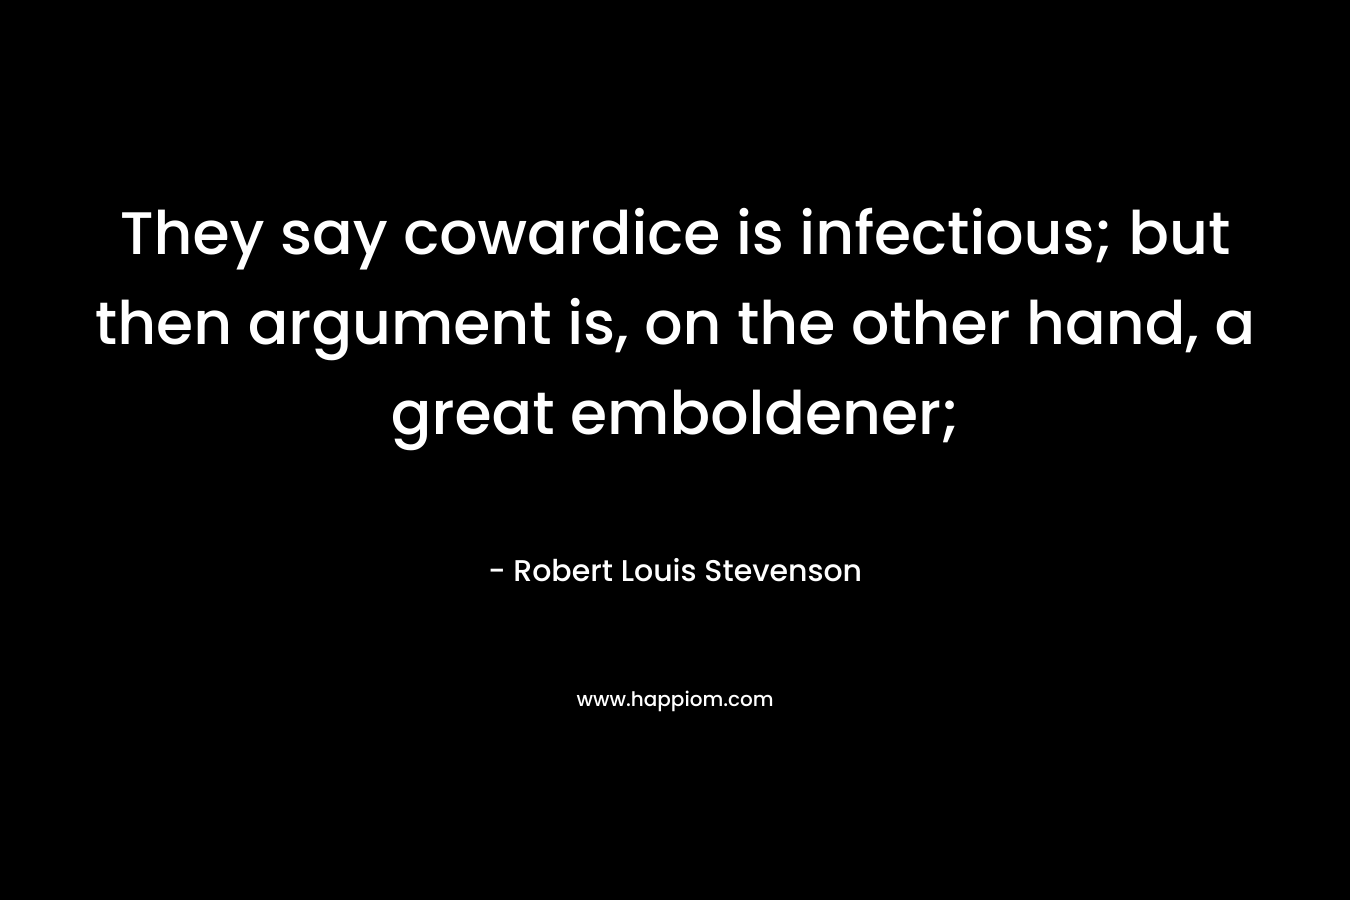 They say cowardice is infectious; but then argument is, on the other hand, a great emboldener;